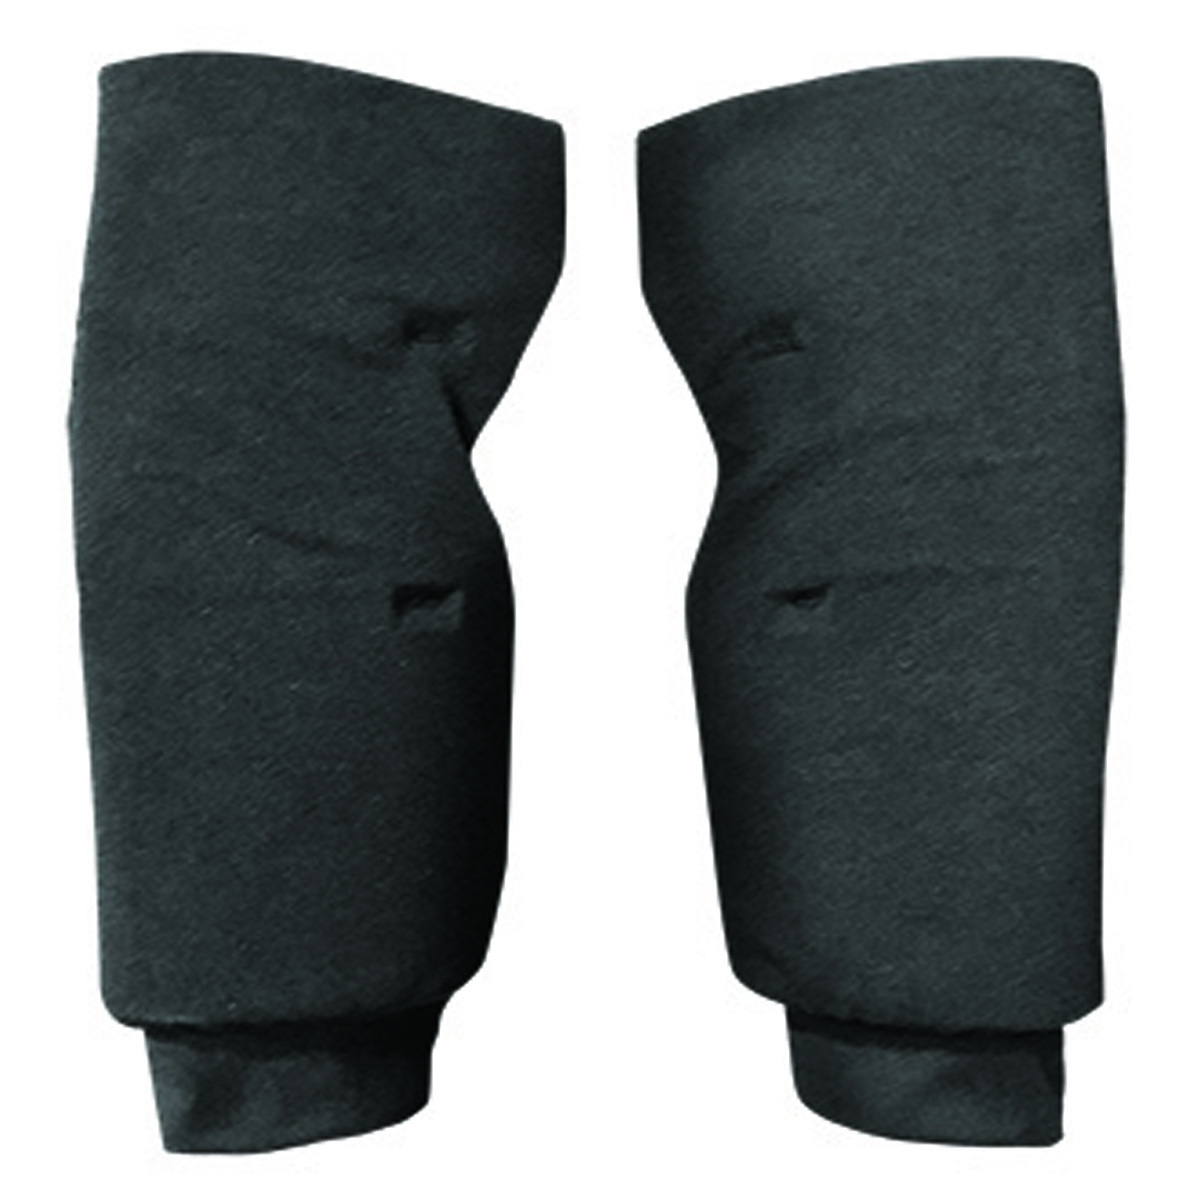 OccuNomix Large Black OccuNomix Polyester/Foam Knee Pad